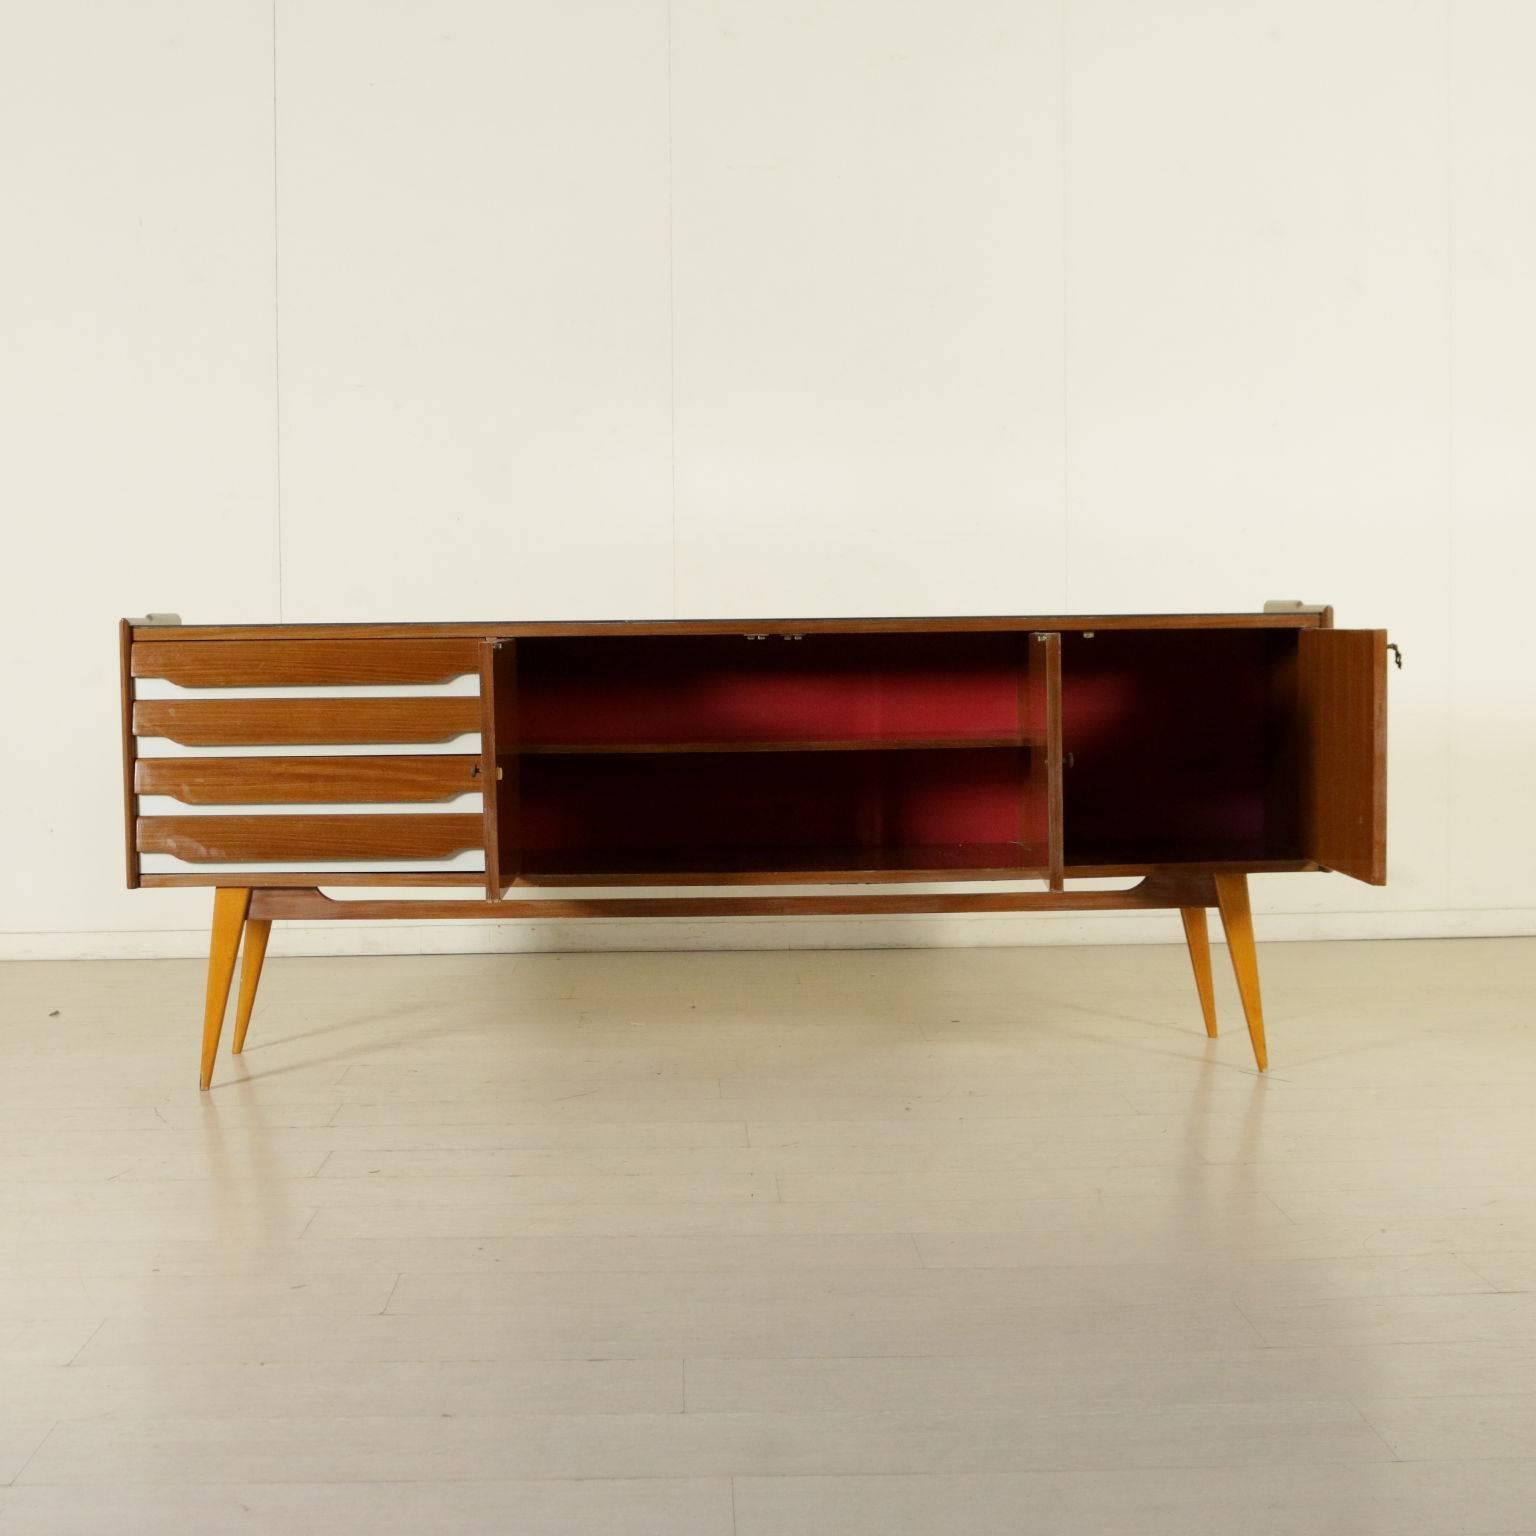 A sideboard, mahogany veneer, formica inserts, back-treated glass. Manufactured in Italy, 1950s.